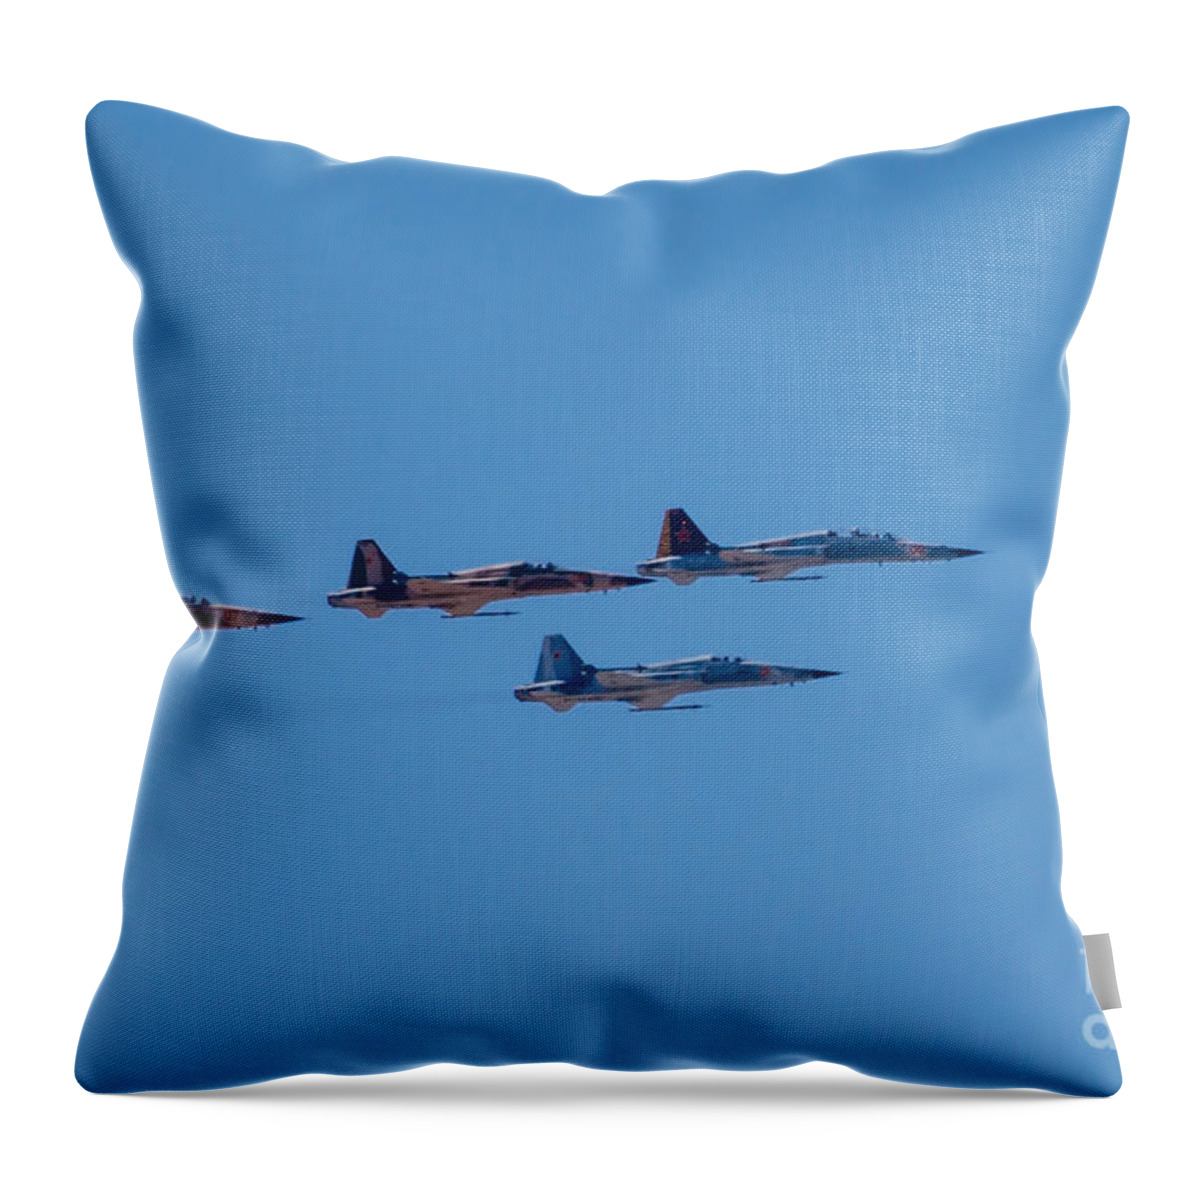 Tiger Ii Throw Pillow featuring the photograph Tiger II Fly By by Robert Bales